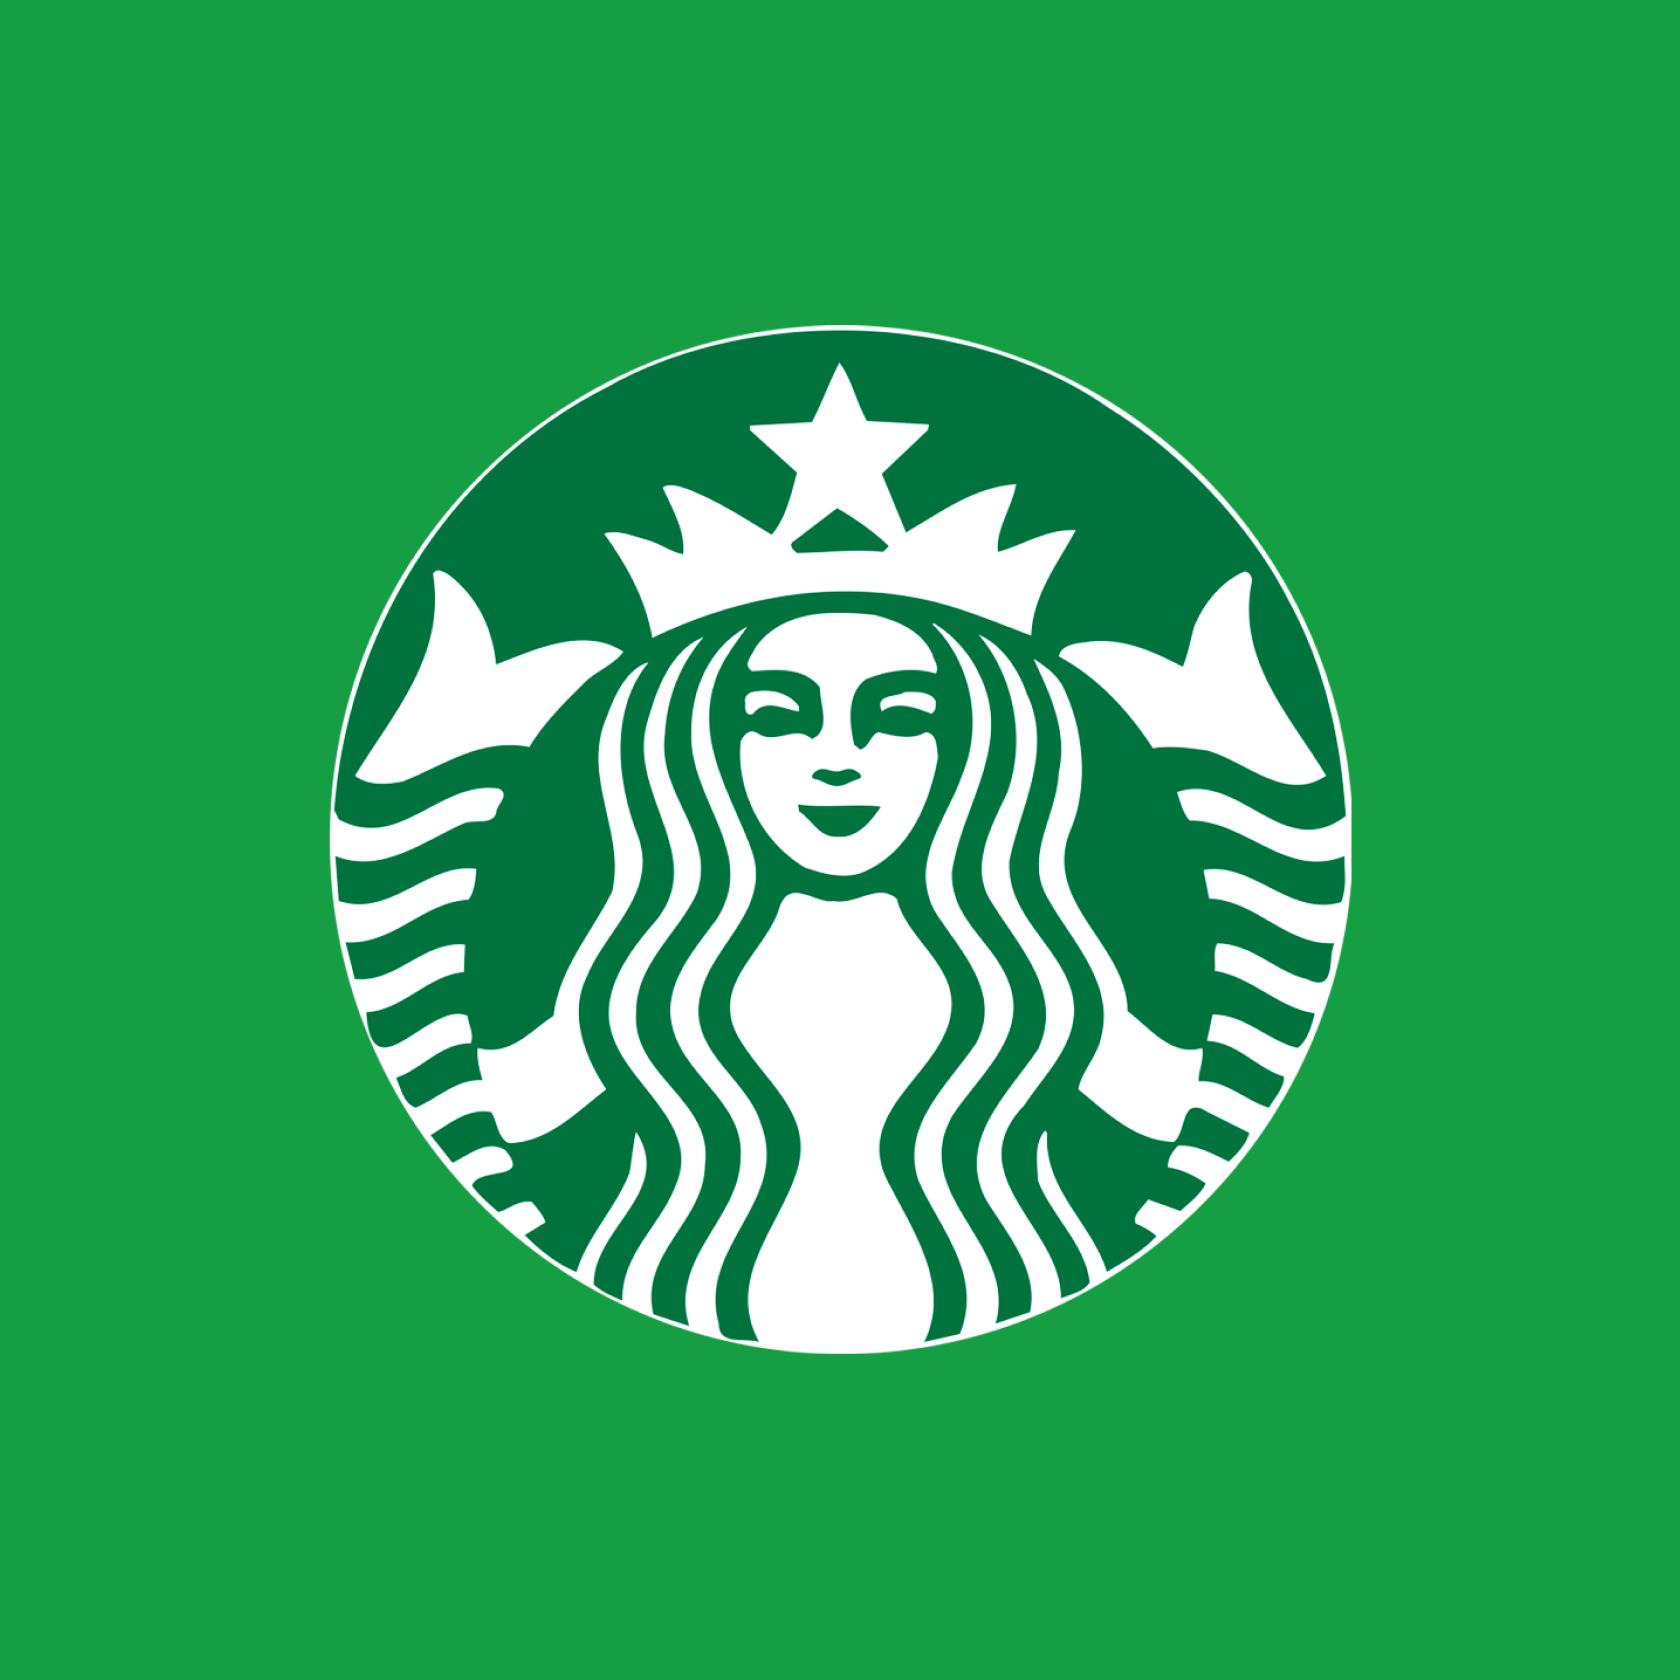 How Starbucks Could Have Avoided Devaluing Their Stars